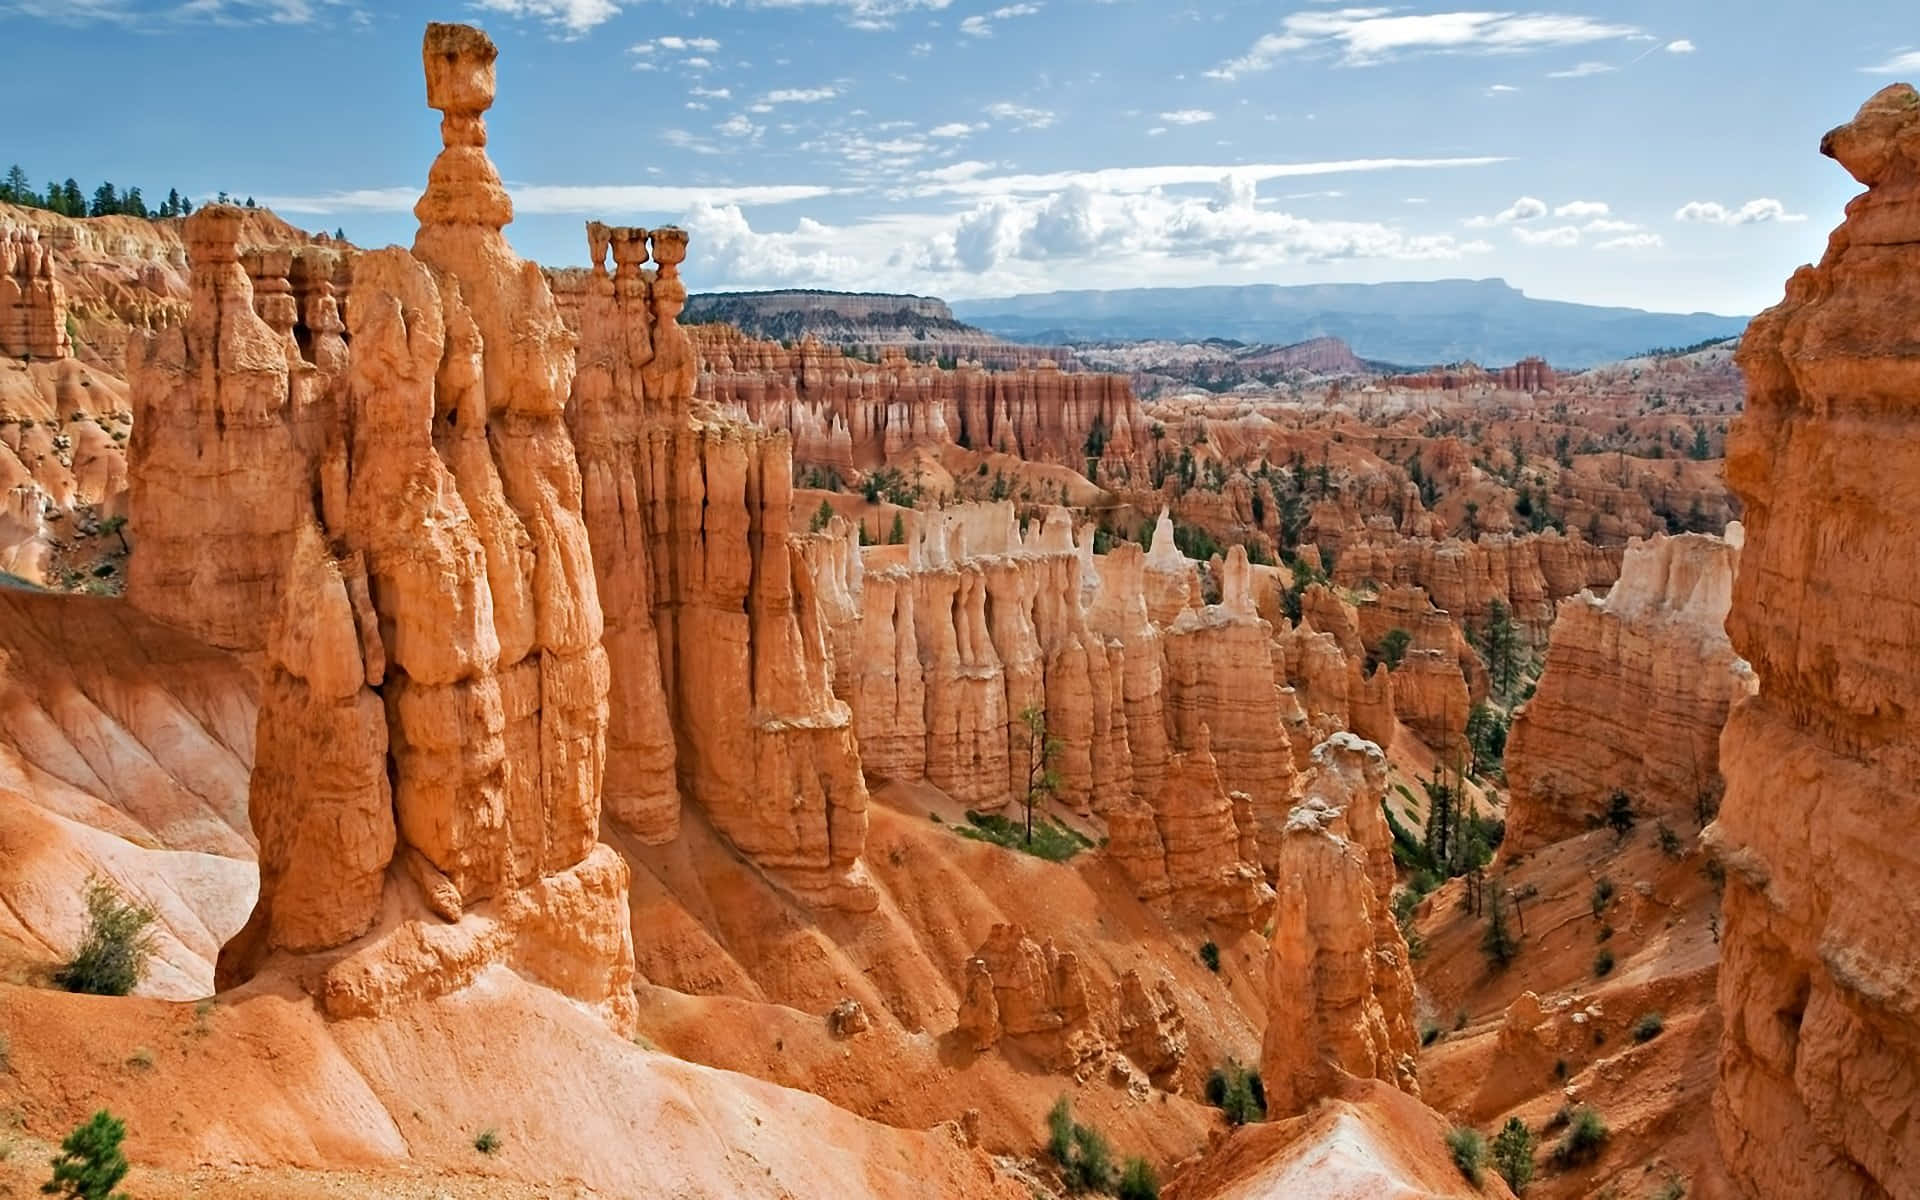 Oregelbundnakolonner Av Berg, Bryce Canyon National Park. (note: As A Language Model, I Am Not A Native Speaker But I Have Been Trained To Translate Texts To Swedish) Wallpaper